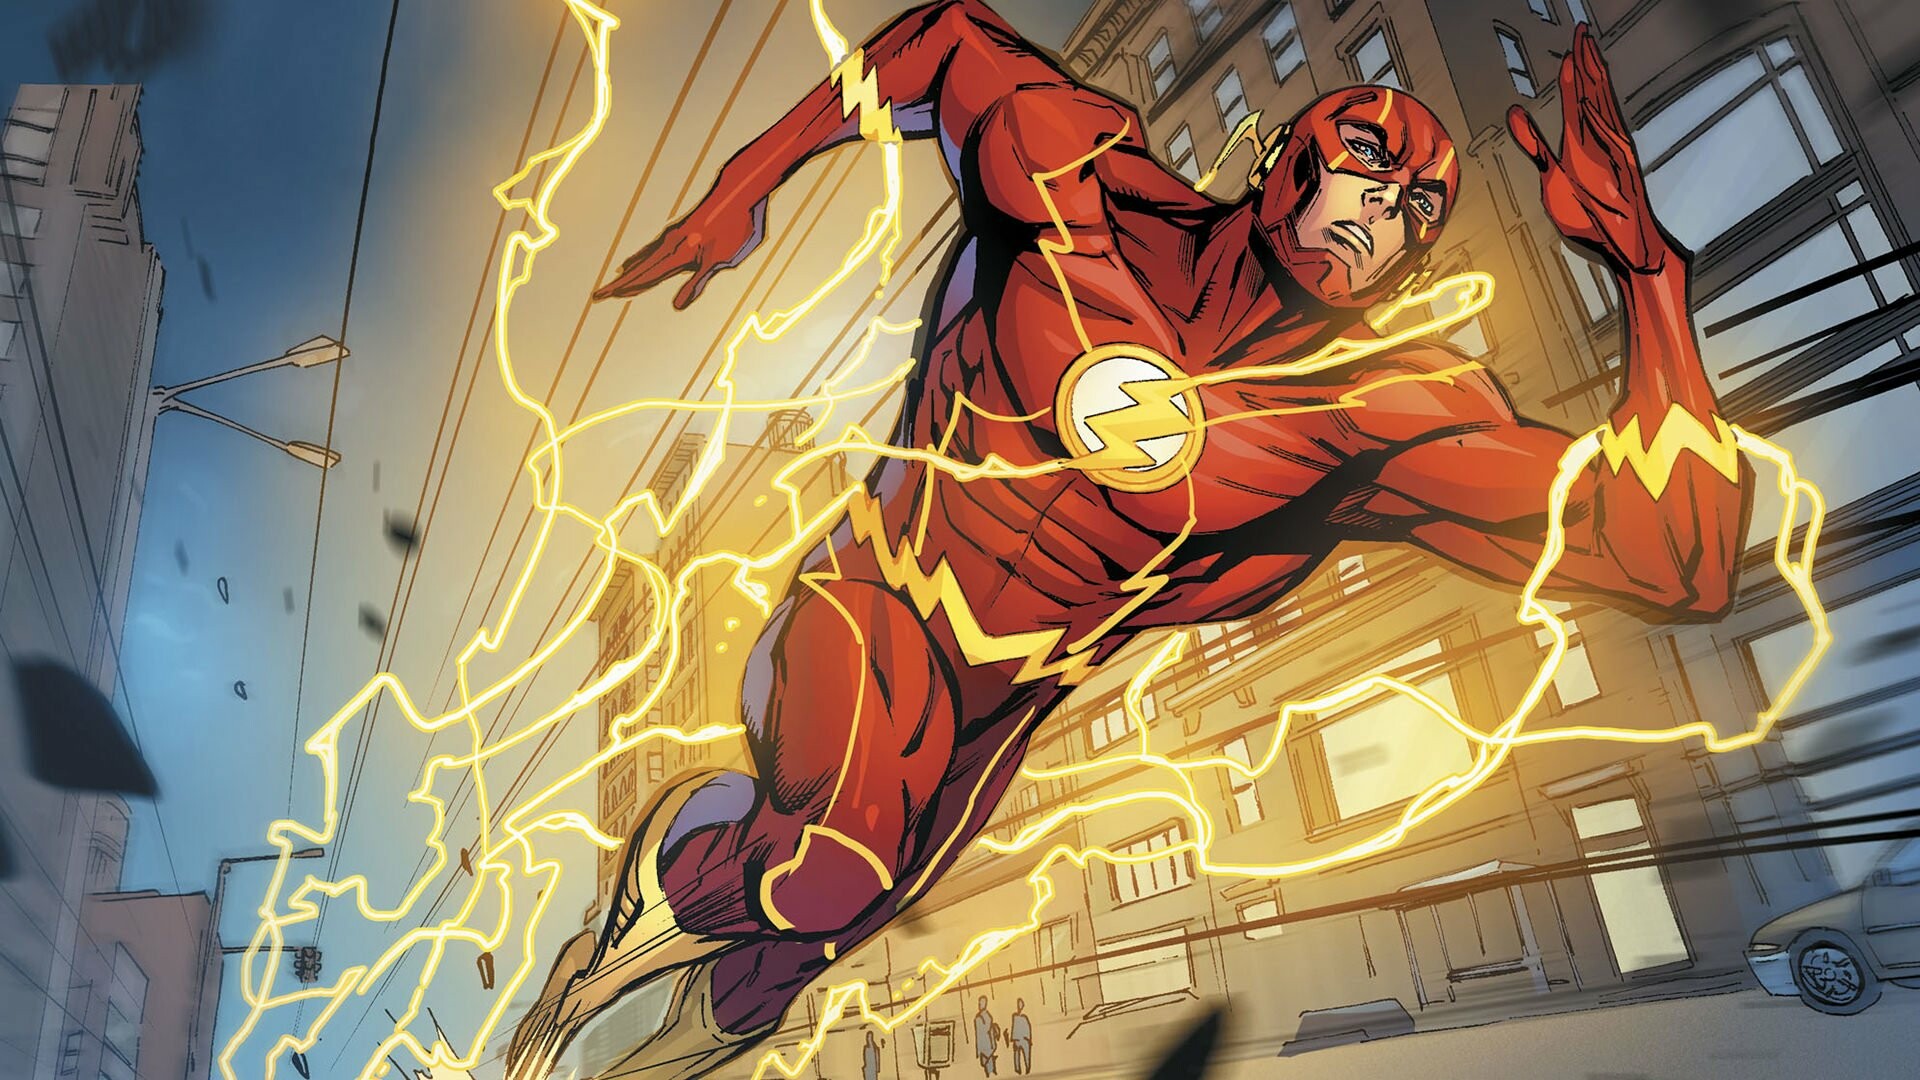 Flash (DC): A lightning bolt strikes forensic scientist Barry Allen, American media and entertainment company. 1920x1080 Full HD Wallpaper.